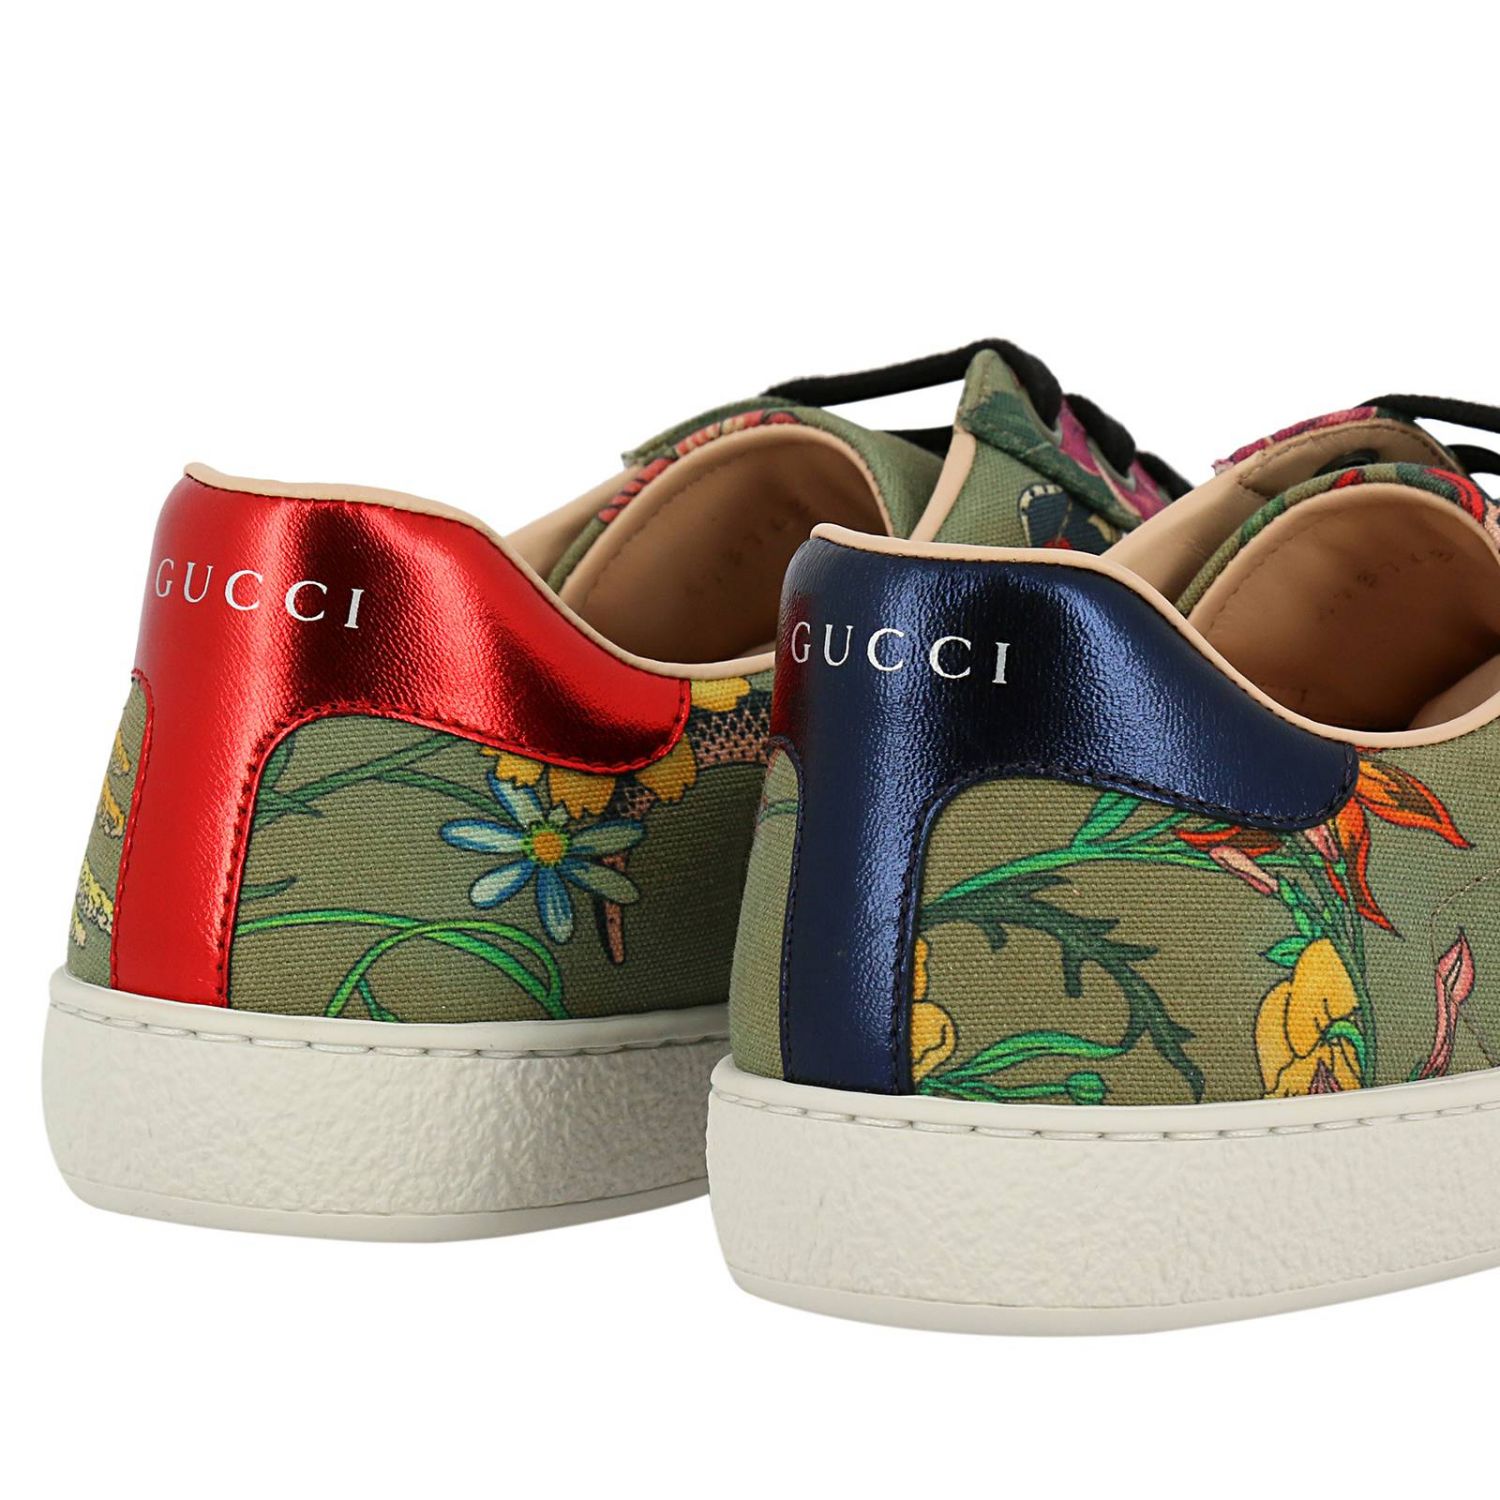 New gucci shoes